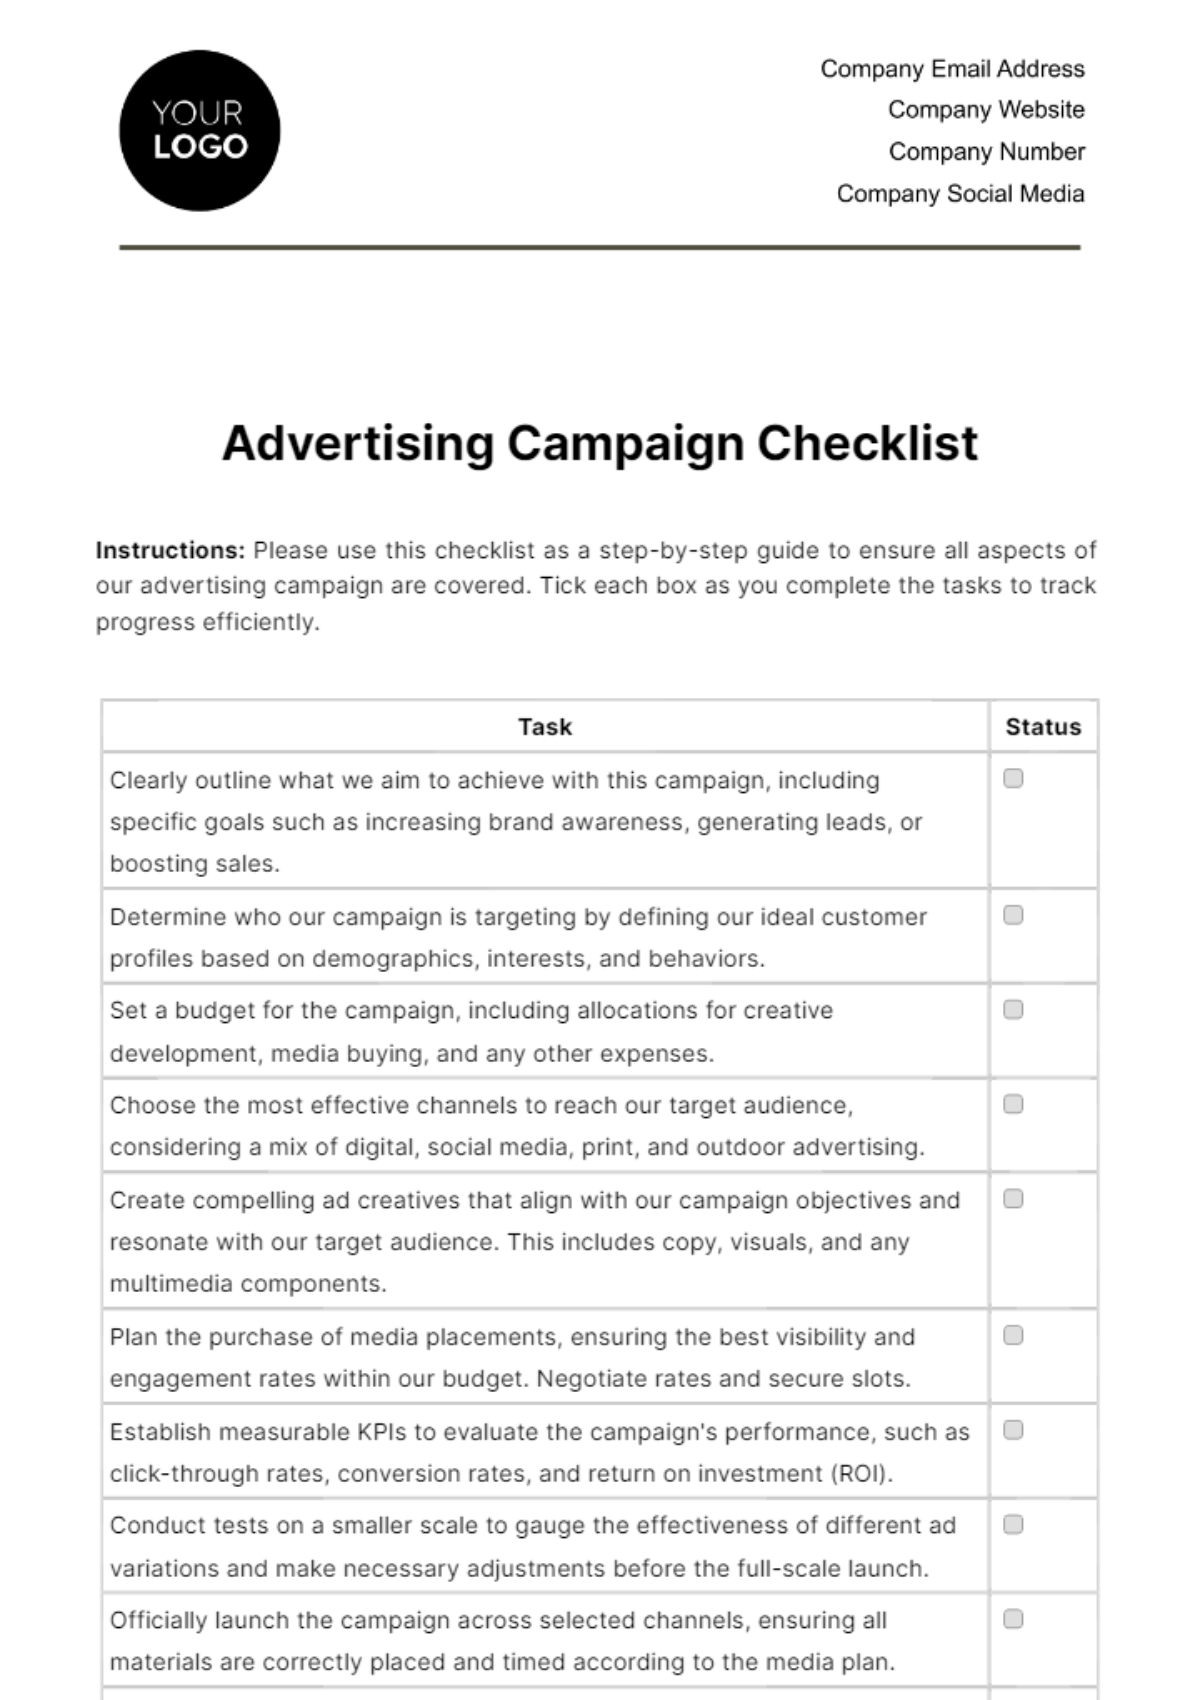 Free Advertising Campaign Checklist Template